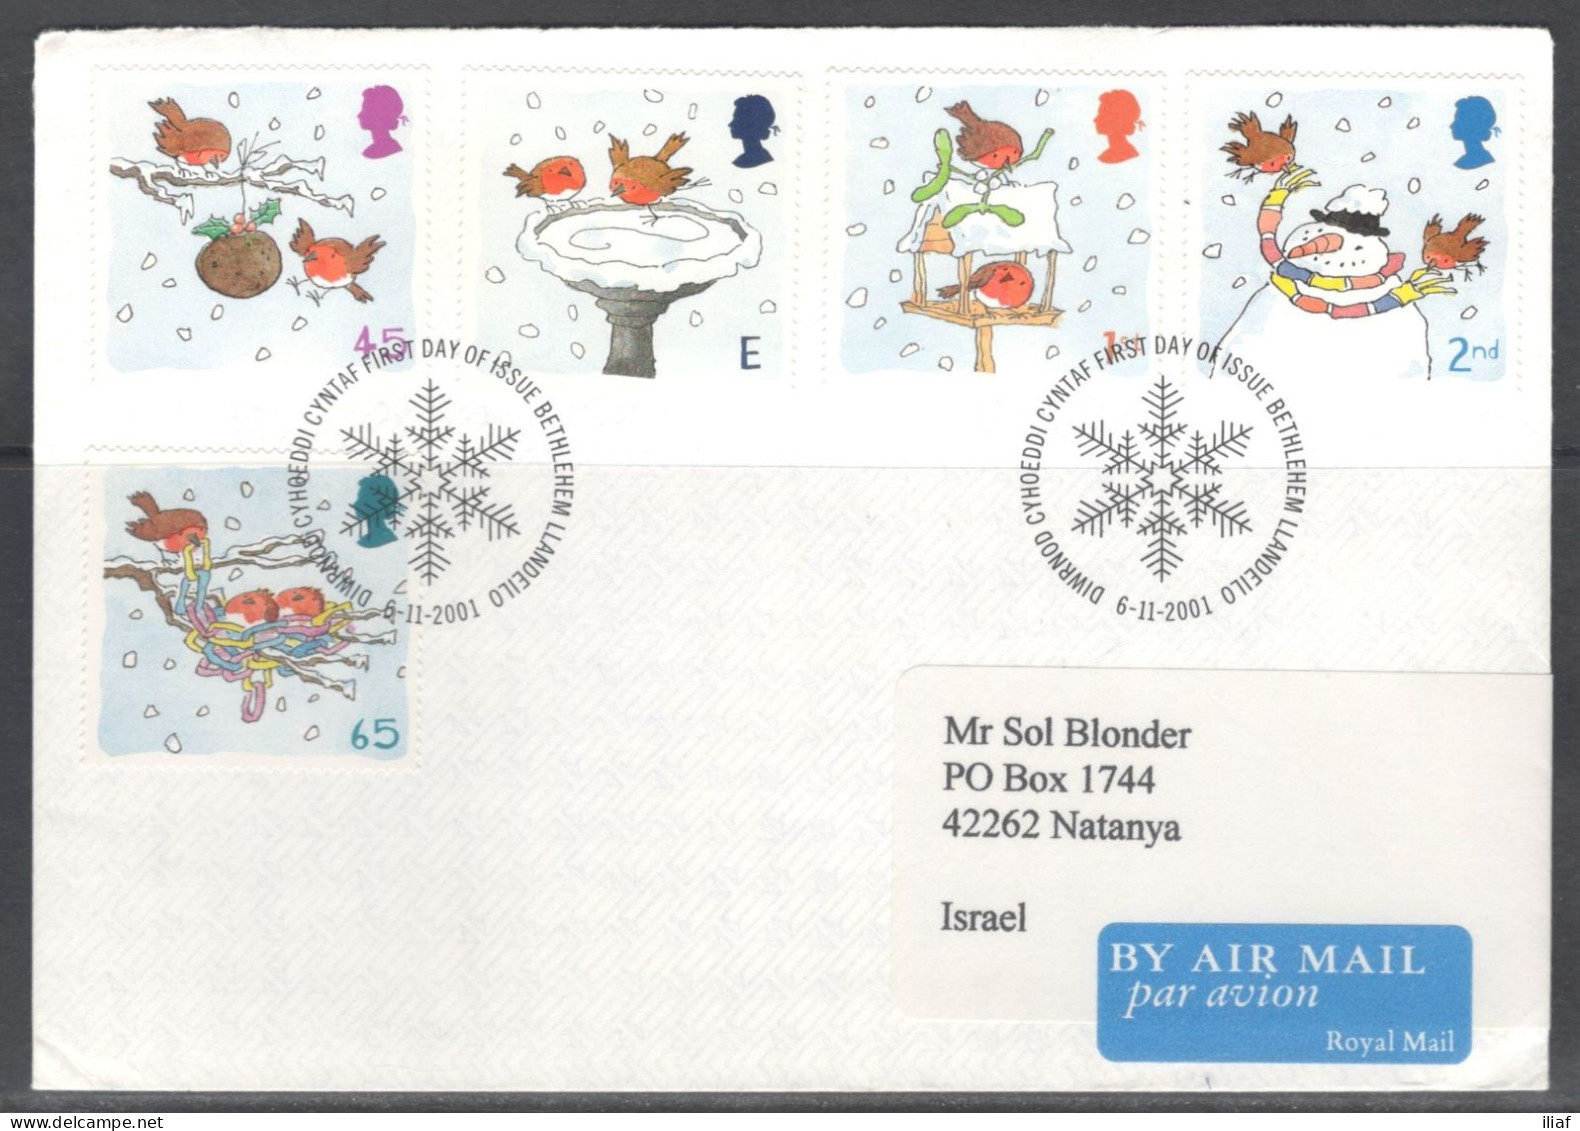 United Kingdom Of Great Britain.  FDC Sc. 2002-2006.  Christmas 2001 - Robins.  FDC Cancellation On Plain Envelope - 1981-1990 Em. Décimales